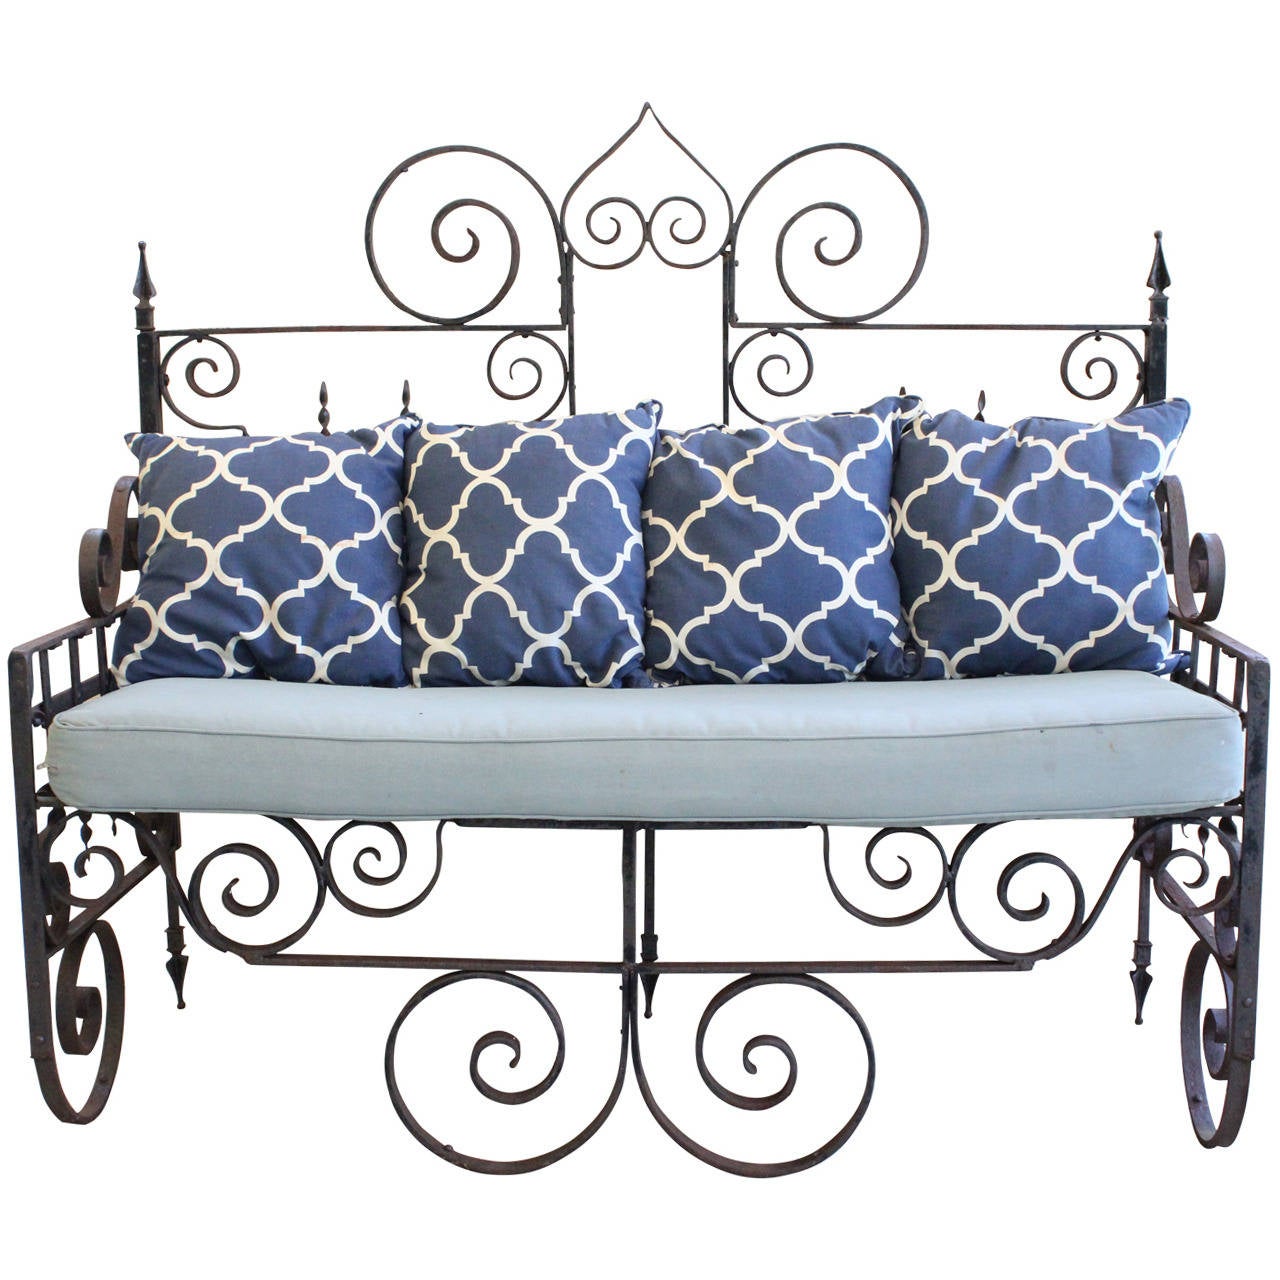 A 'tour de force design! hand-forged American garden wrought iron bench sofa. with intricate scroll motif, raised centre pediment and arrow head finials and rear feet with a very special aged rusticated patina. This is a unique rare bench with